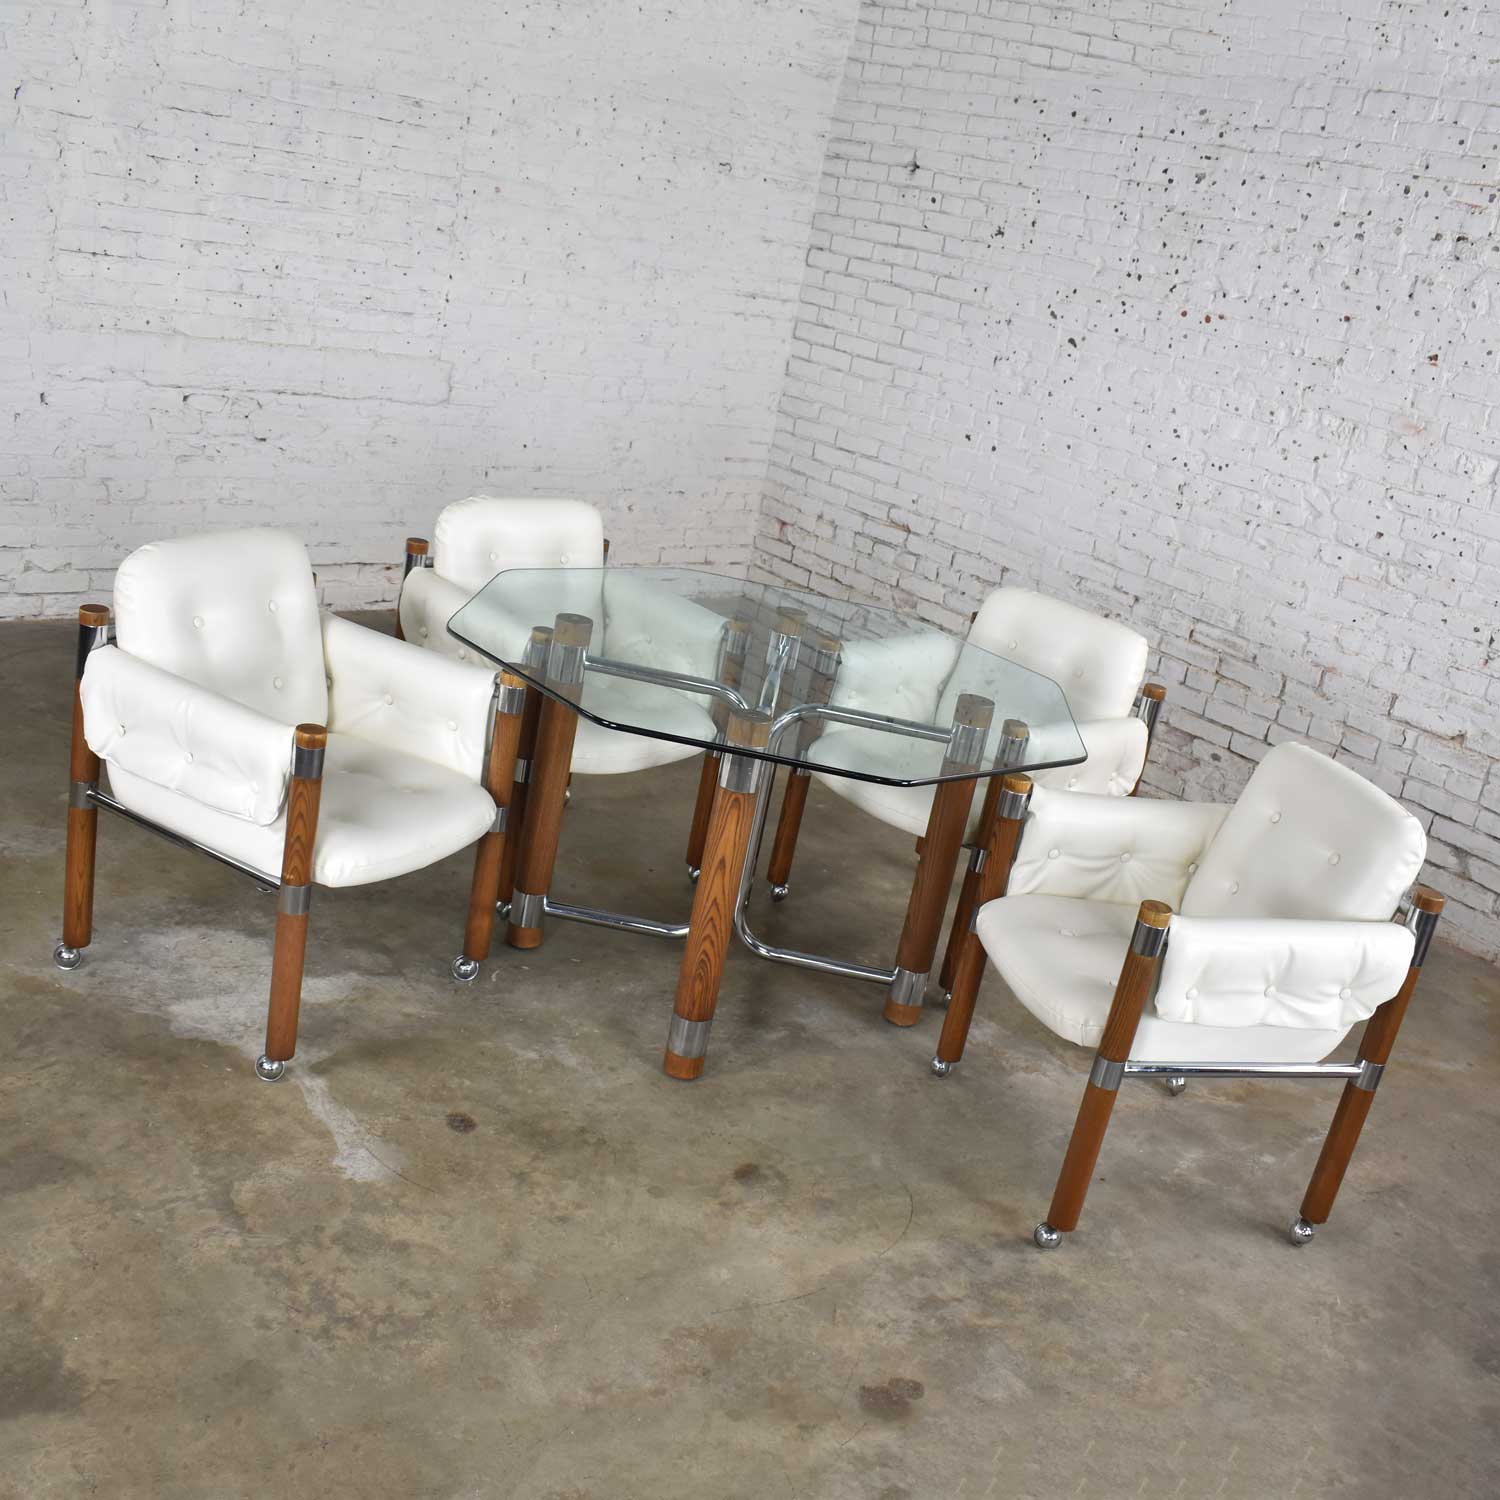 Modern Game Table or Dining Table Glass Chrome Oak with Four White Rolling Chairs